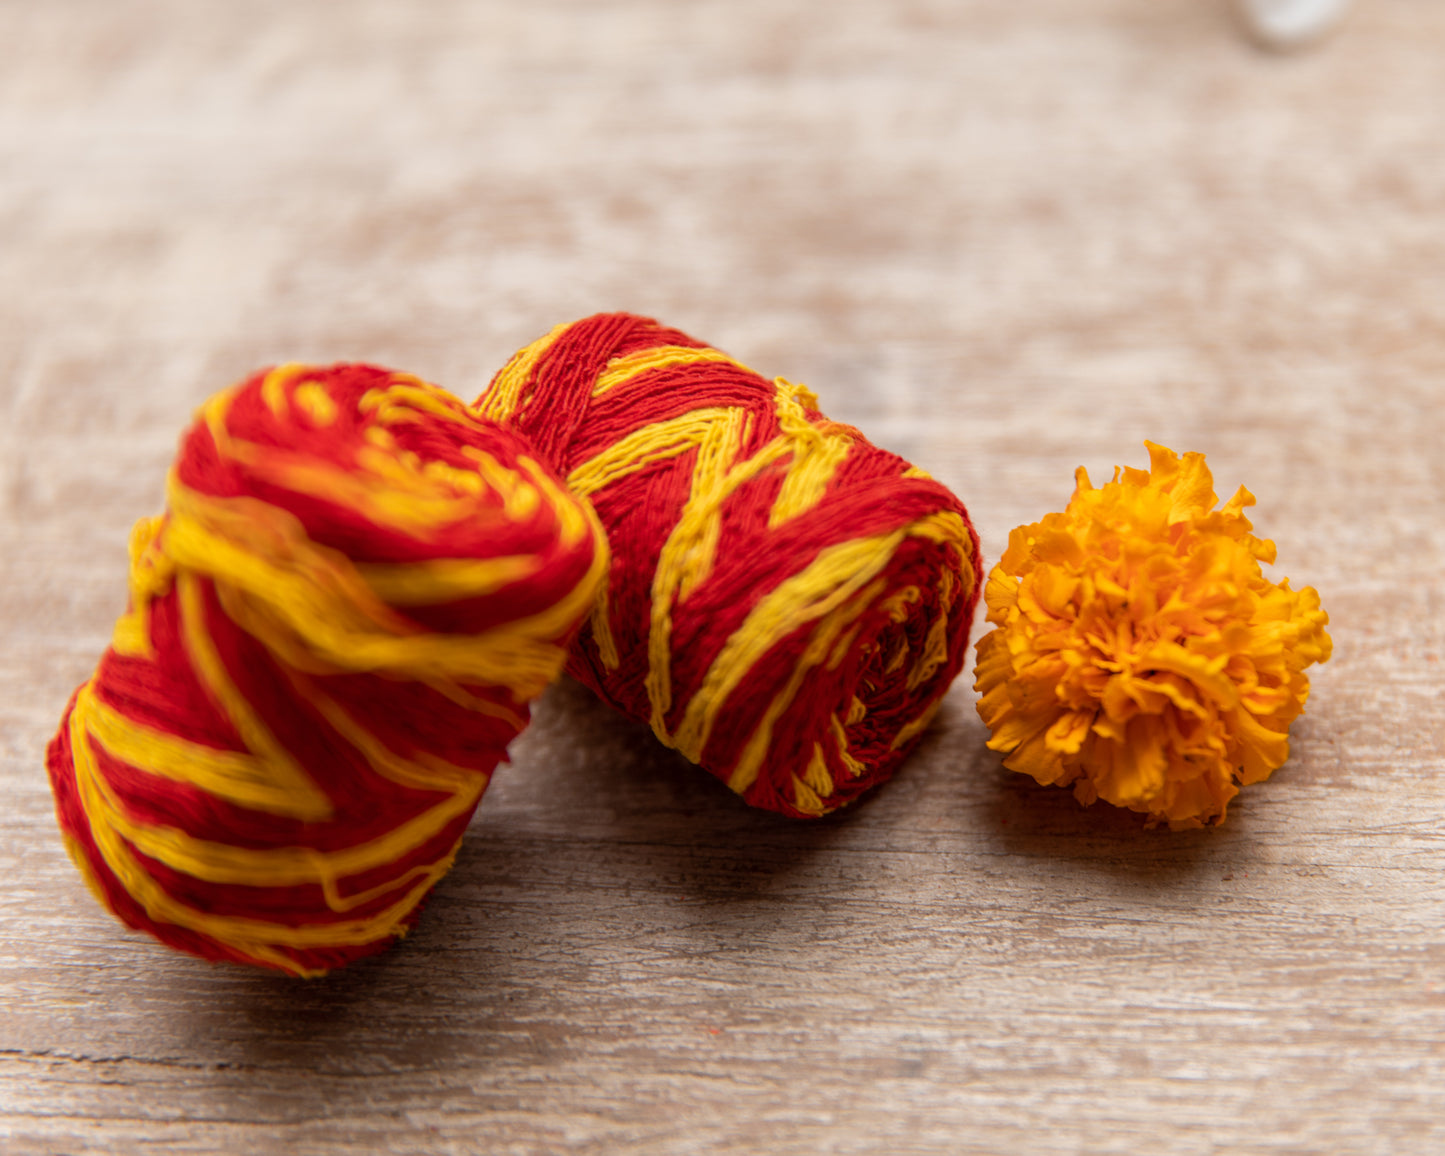 The Moli is a sacred Hindu thread that is a imperative part of any Hindu ceremony or Ritual.